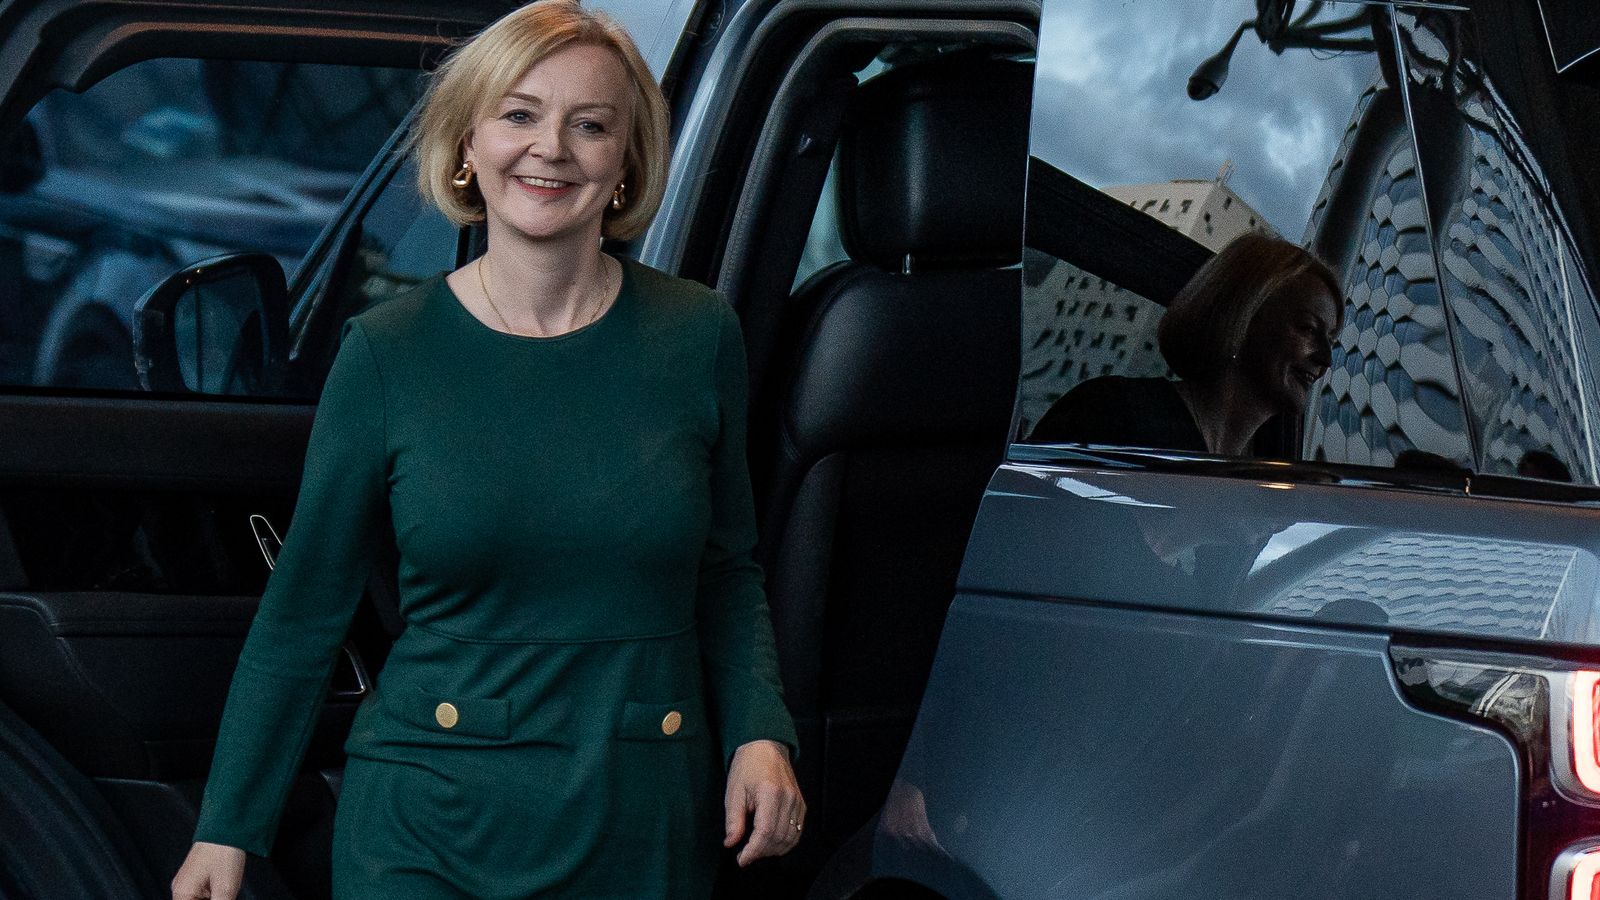 Truss insists she is right 'to do things differently' - amid reports chancellor attended champagne party